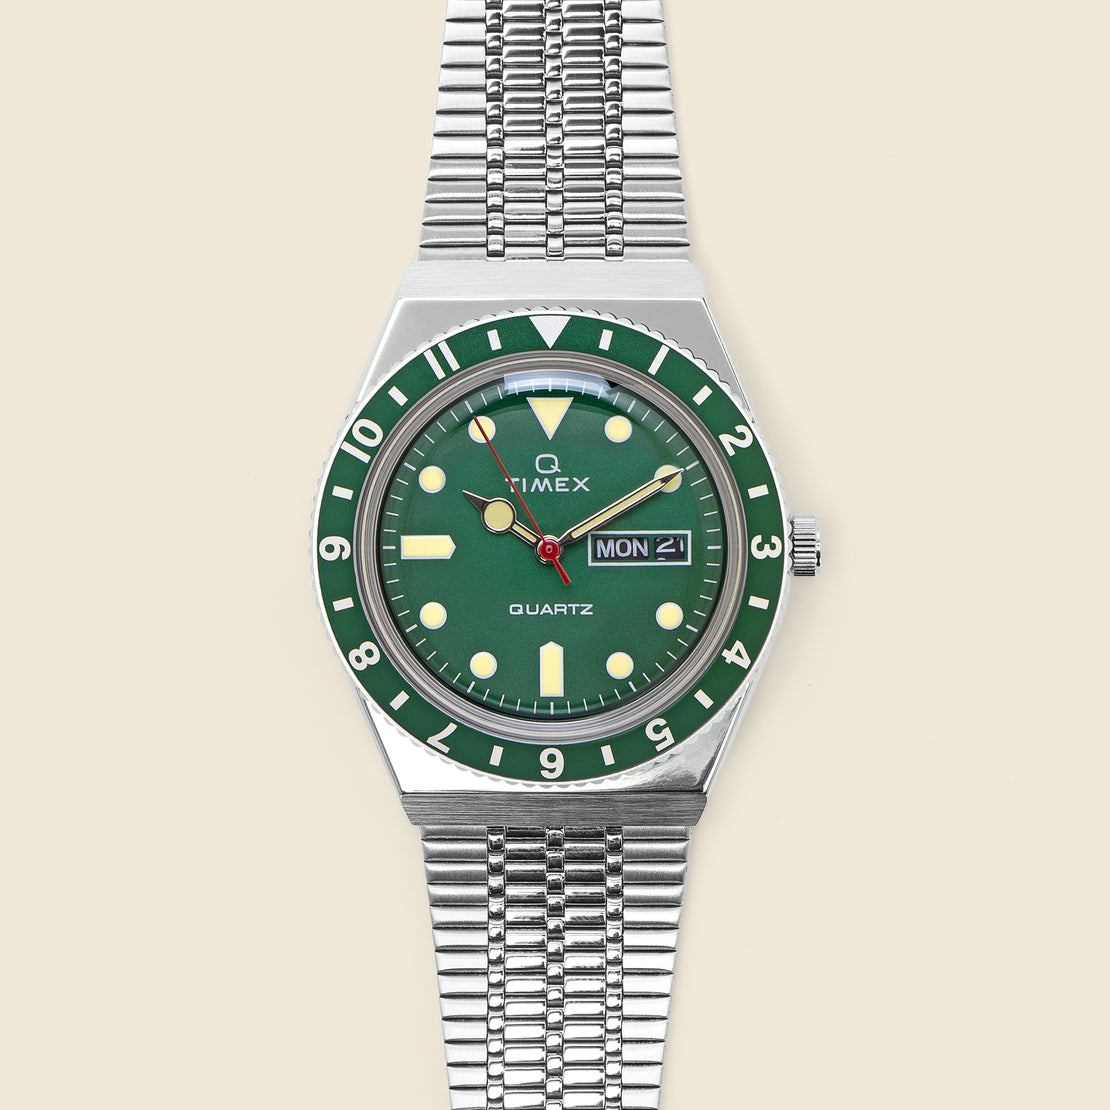 Timex Q Stainless Steel Watch 38mm - Green/Stainless Steel